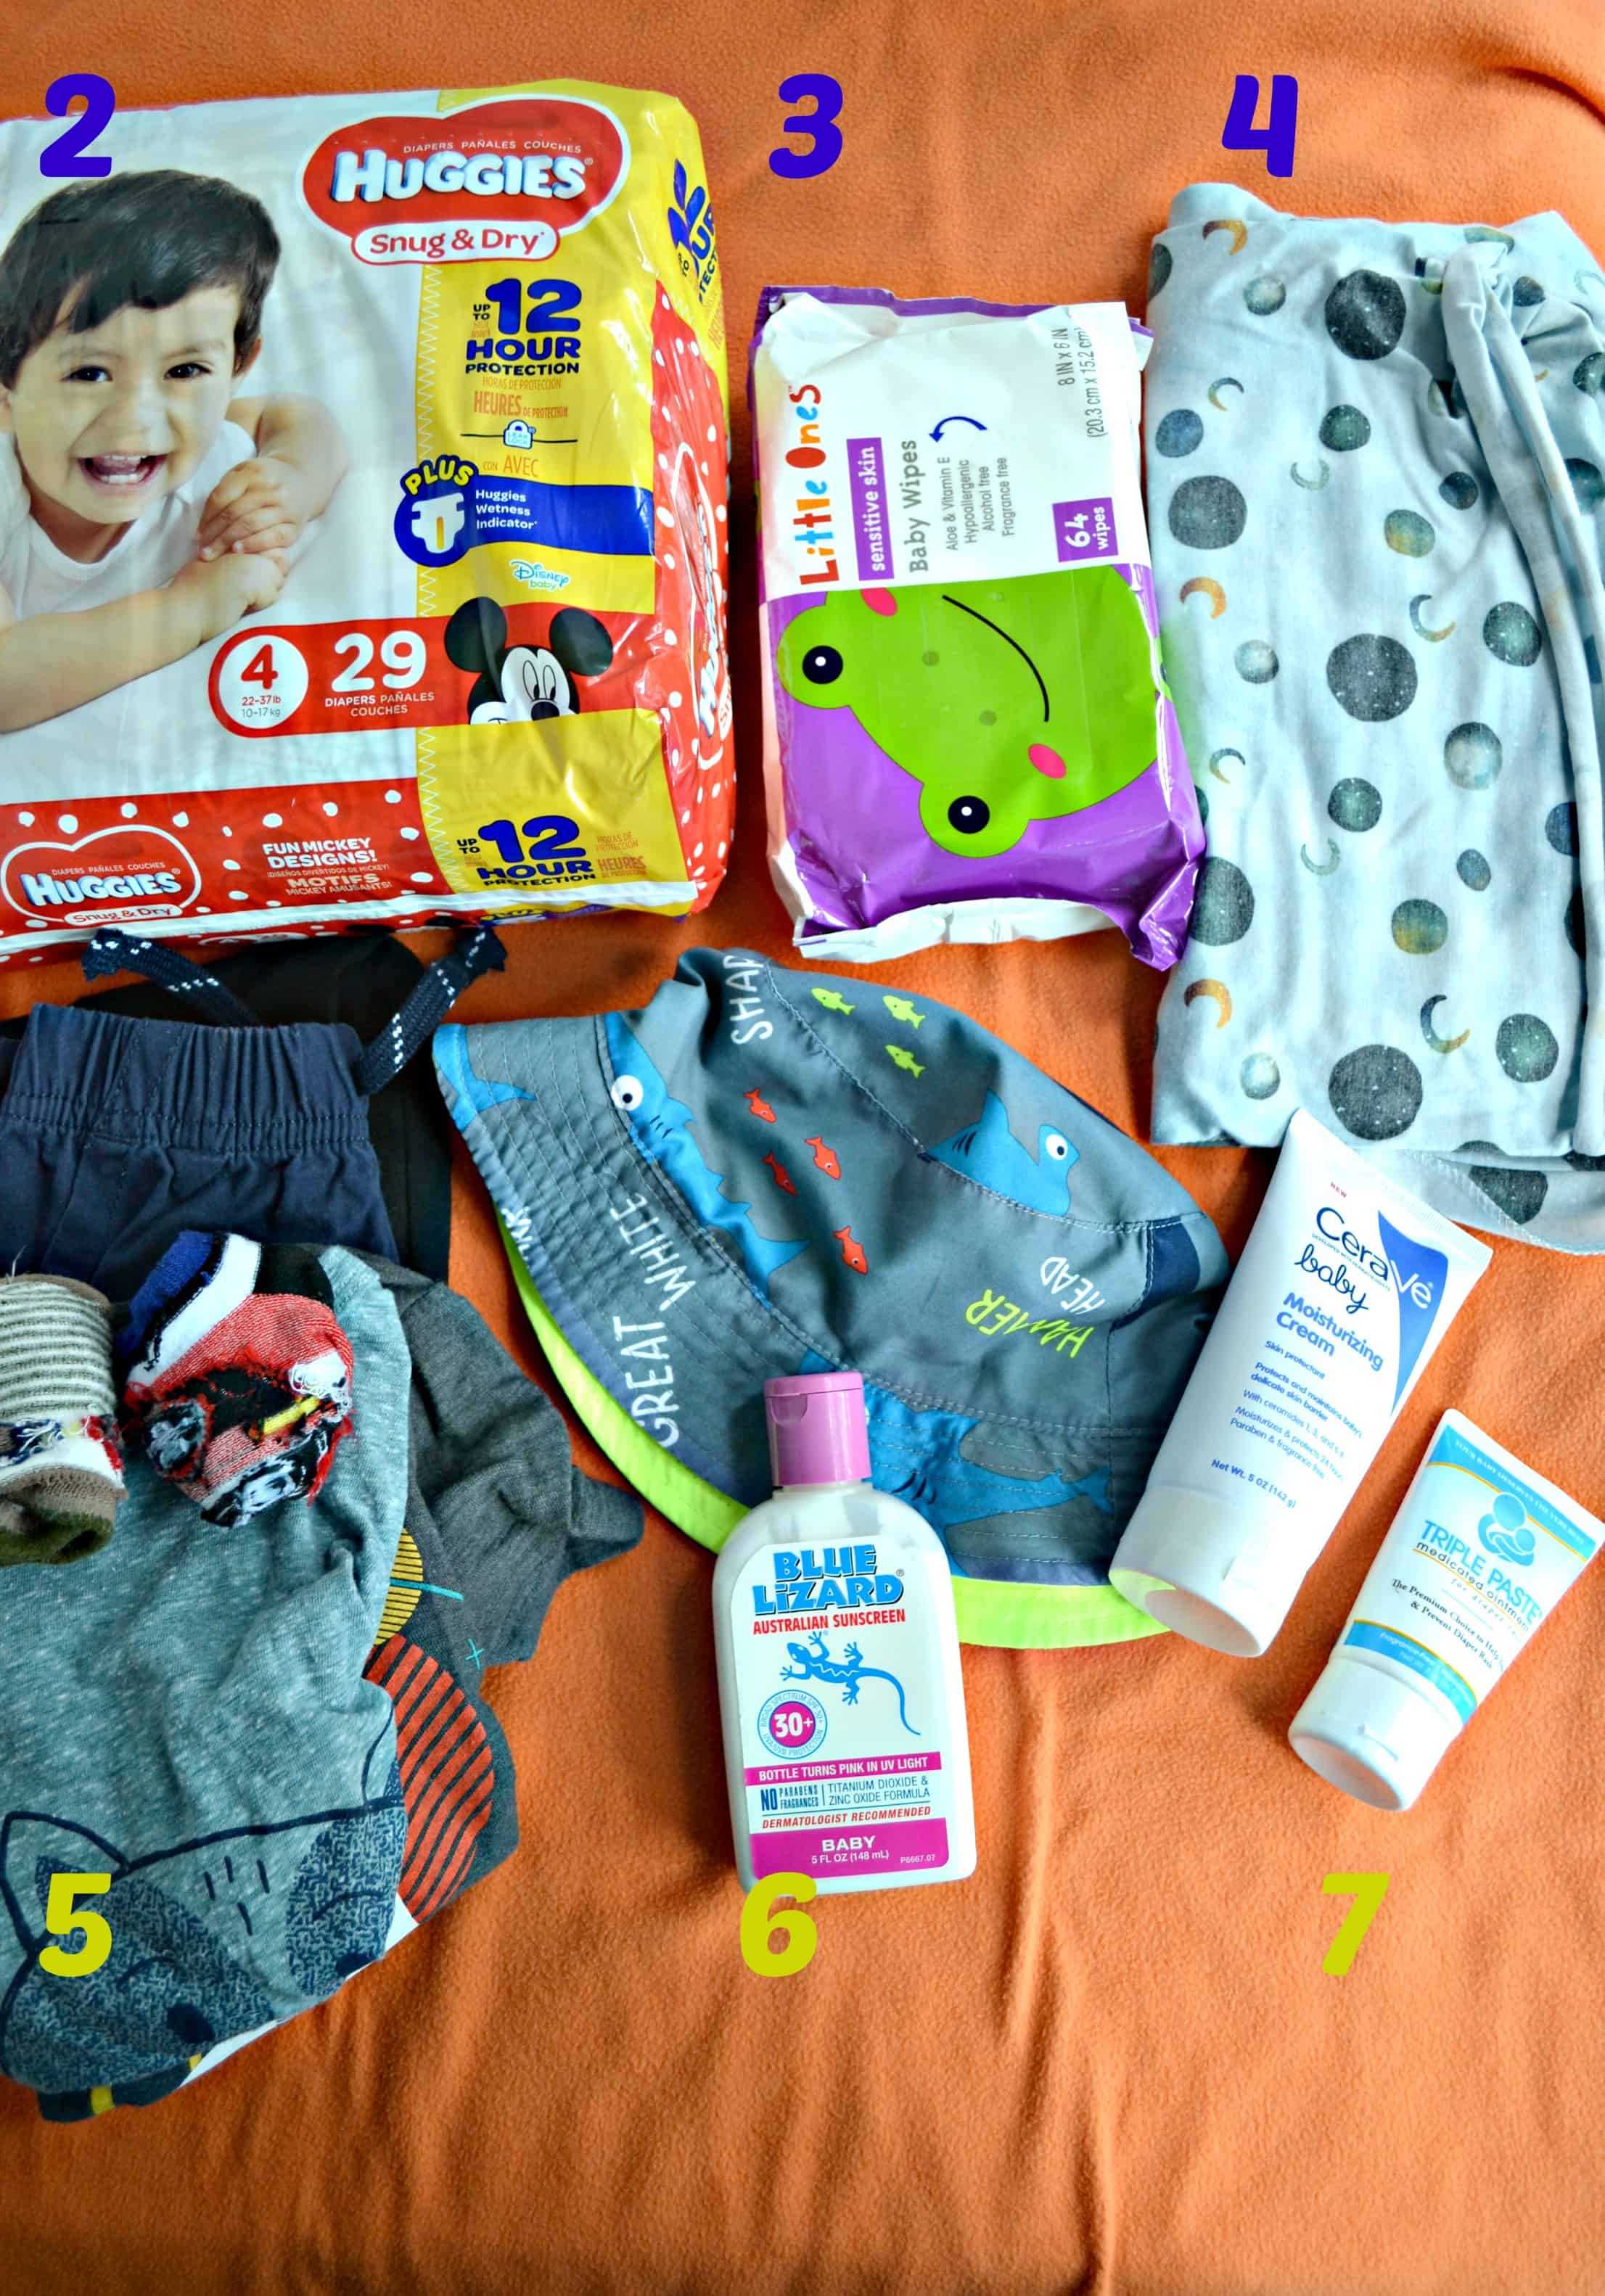 Daycare Checklist: What to Pack and How to Label for Daycare